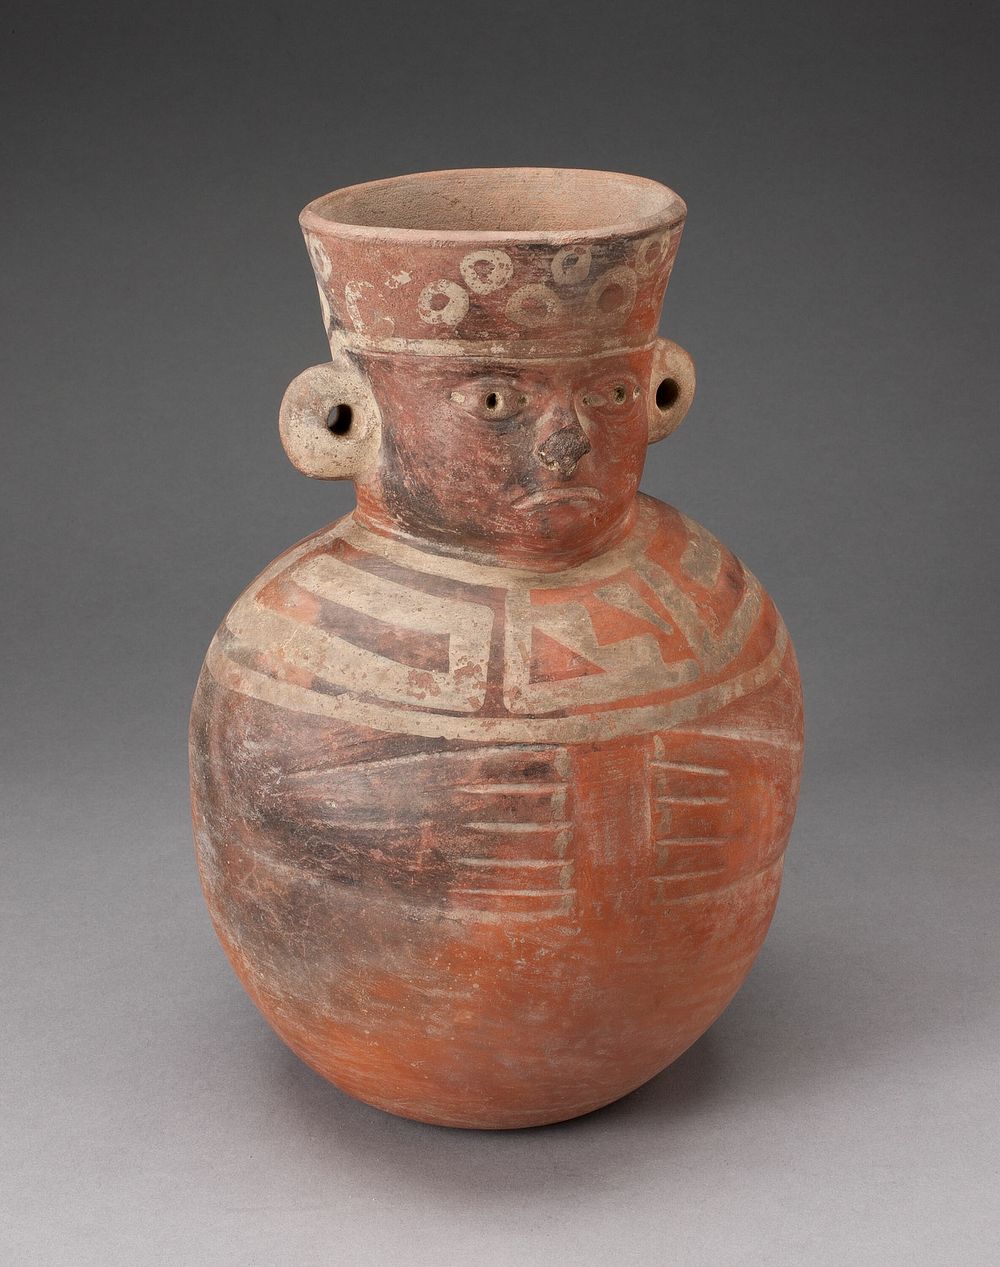 Jar in the Form of a Figure with Modeled Head, Wide Collar, and Incised Hands by Moche